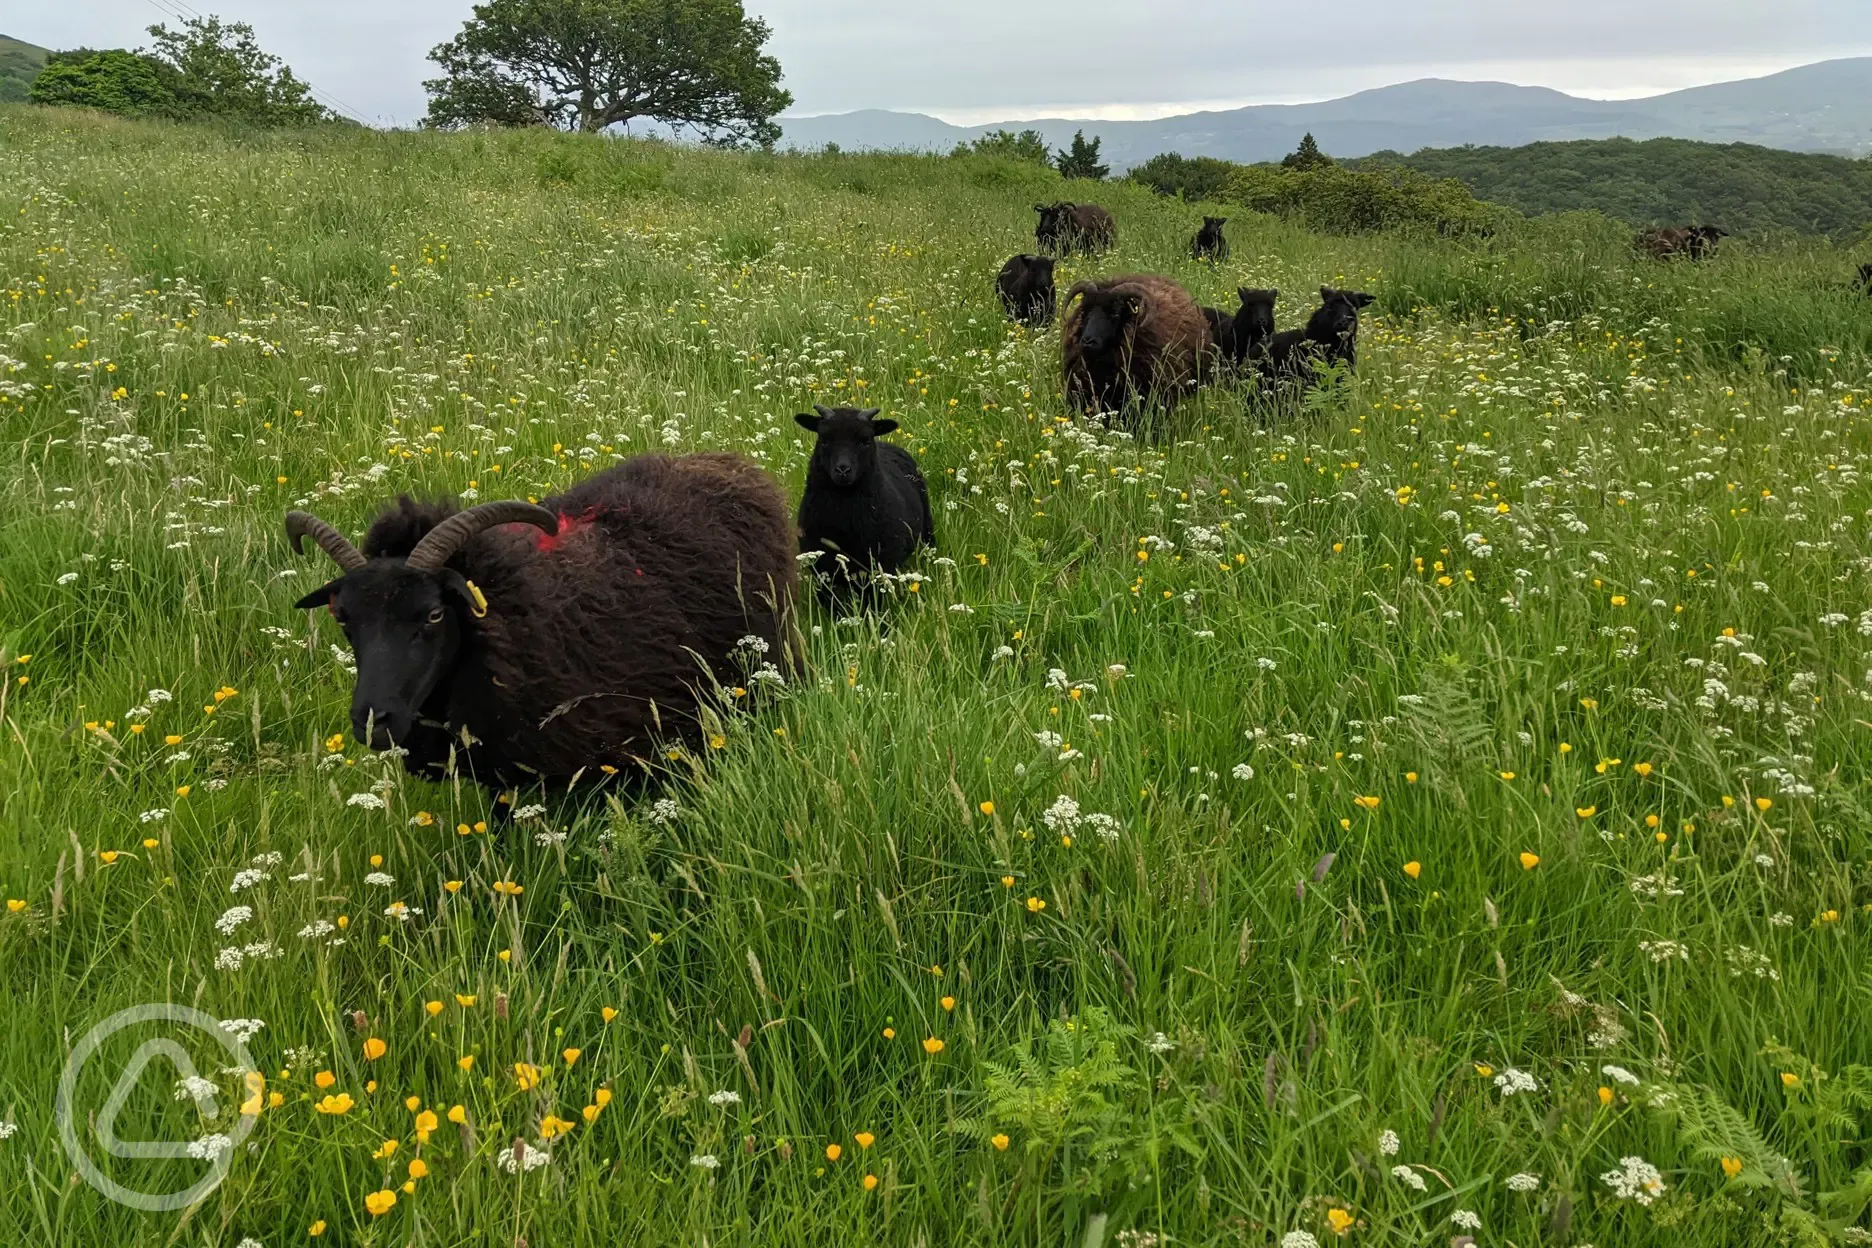 Hebridean ewes and lambs graze the site in summer 